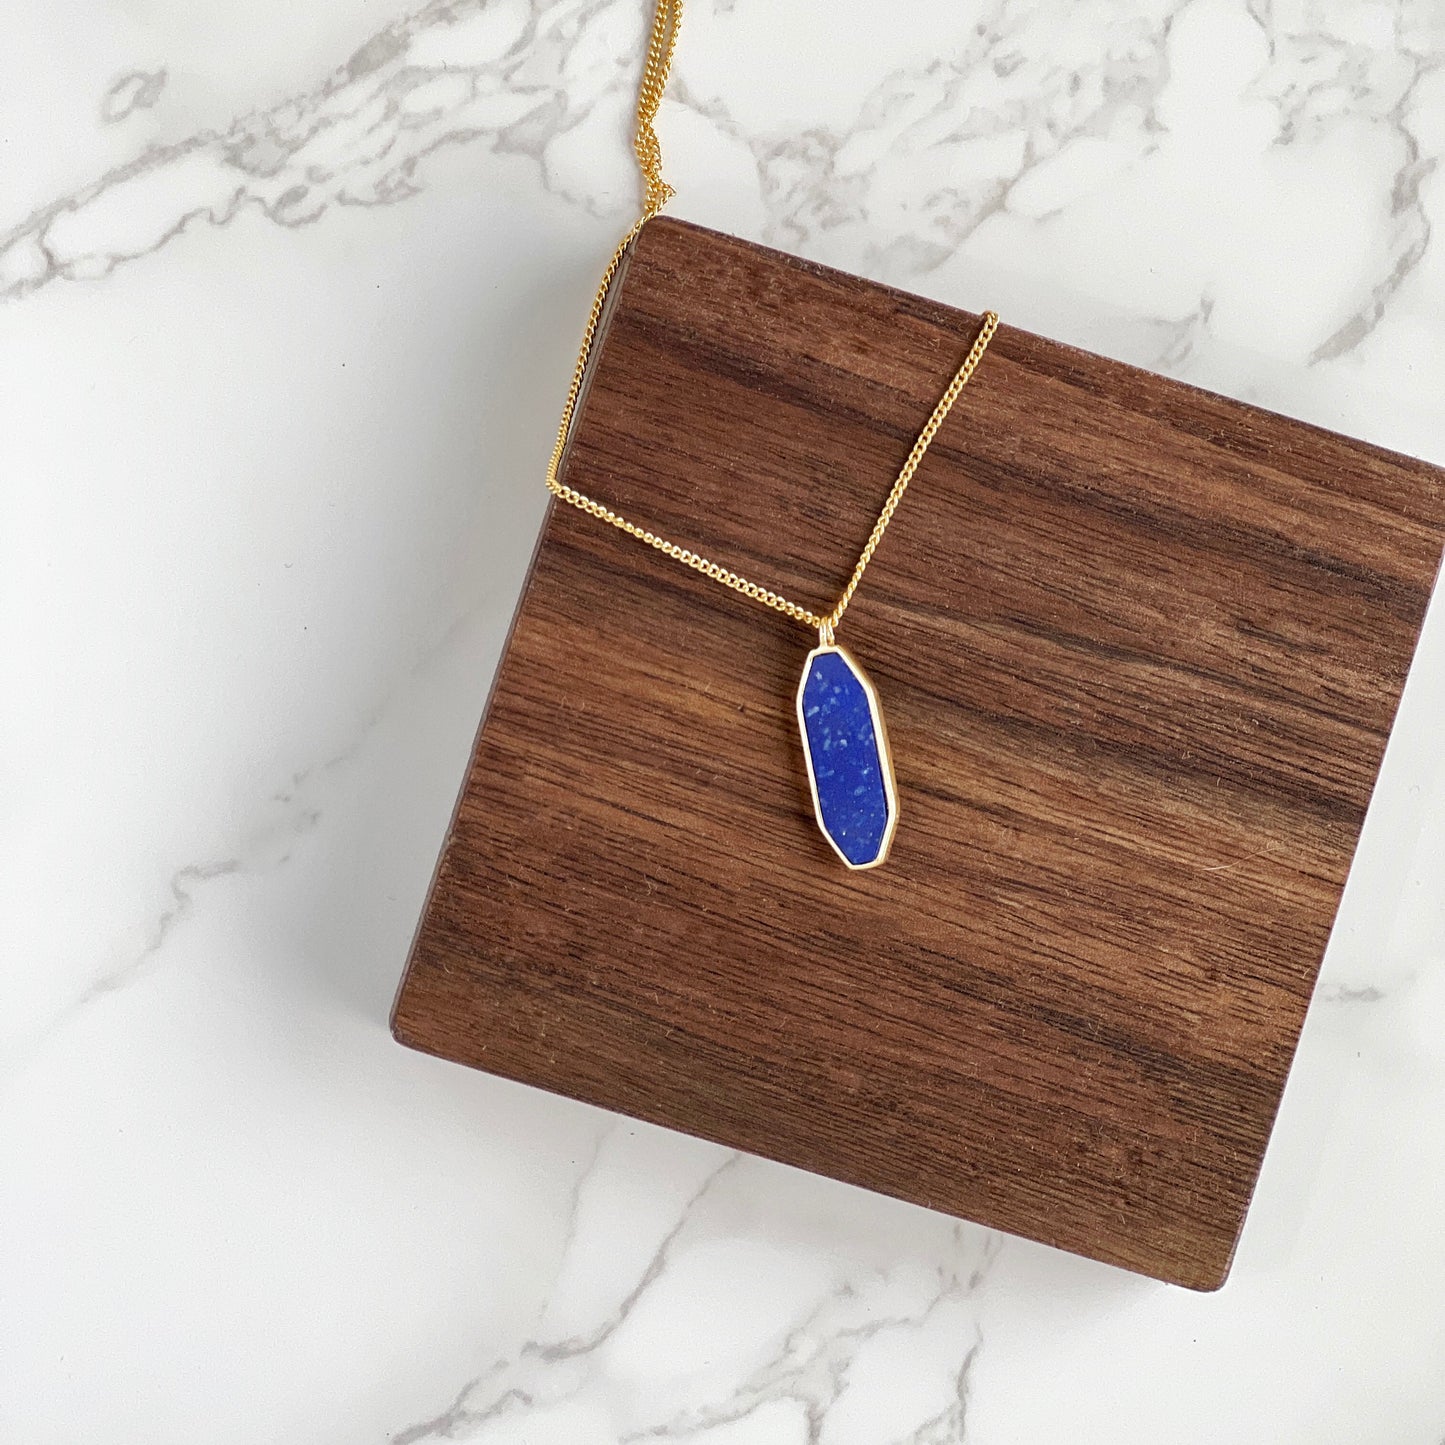 Lapis Lazuli Gemstone Pendant Necklace in Sterling Silver